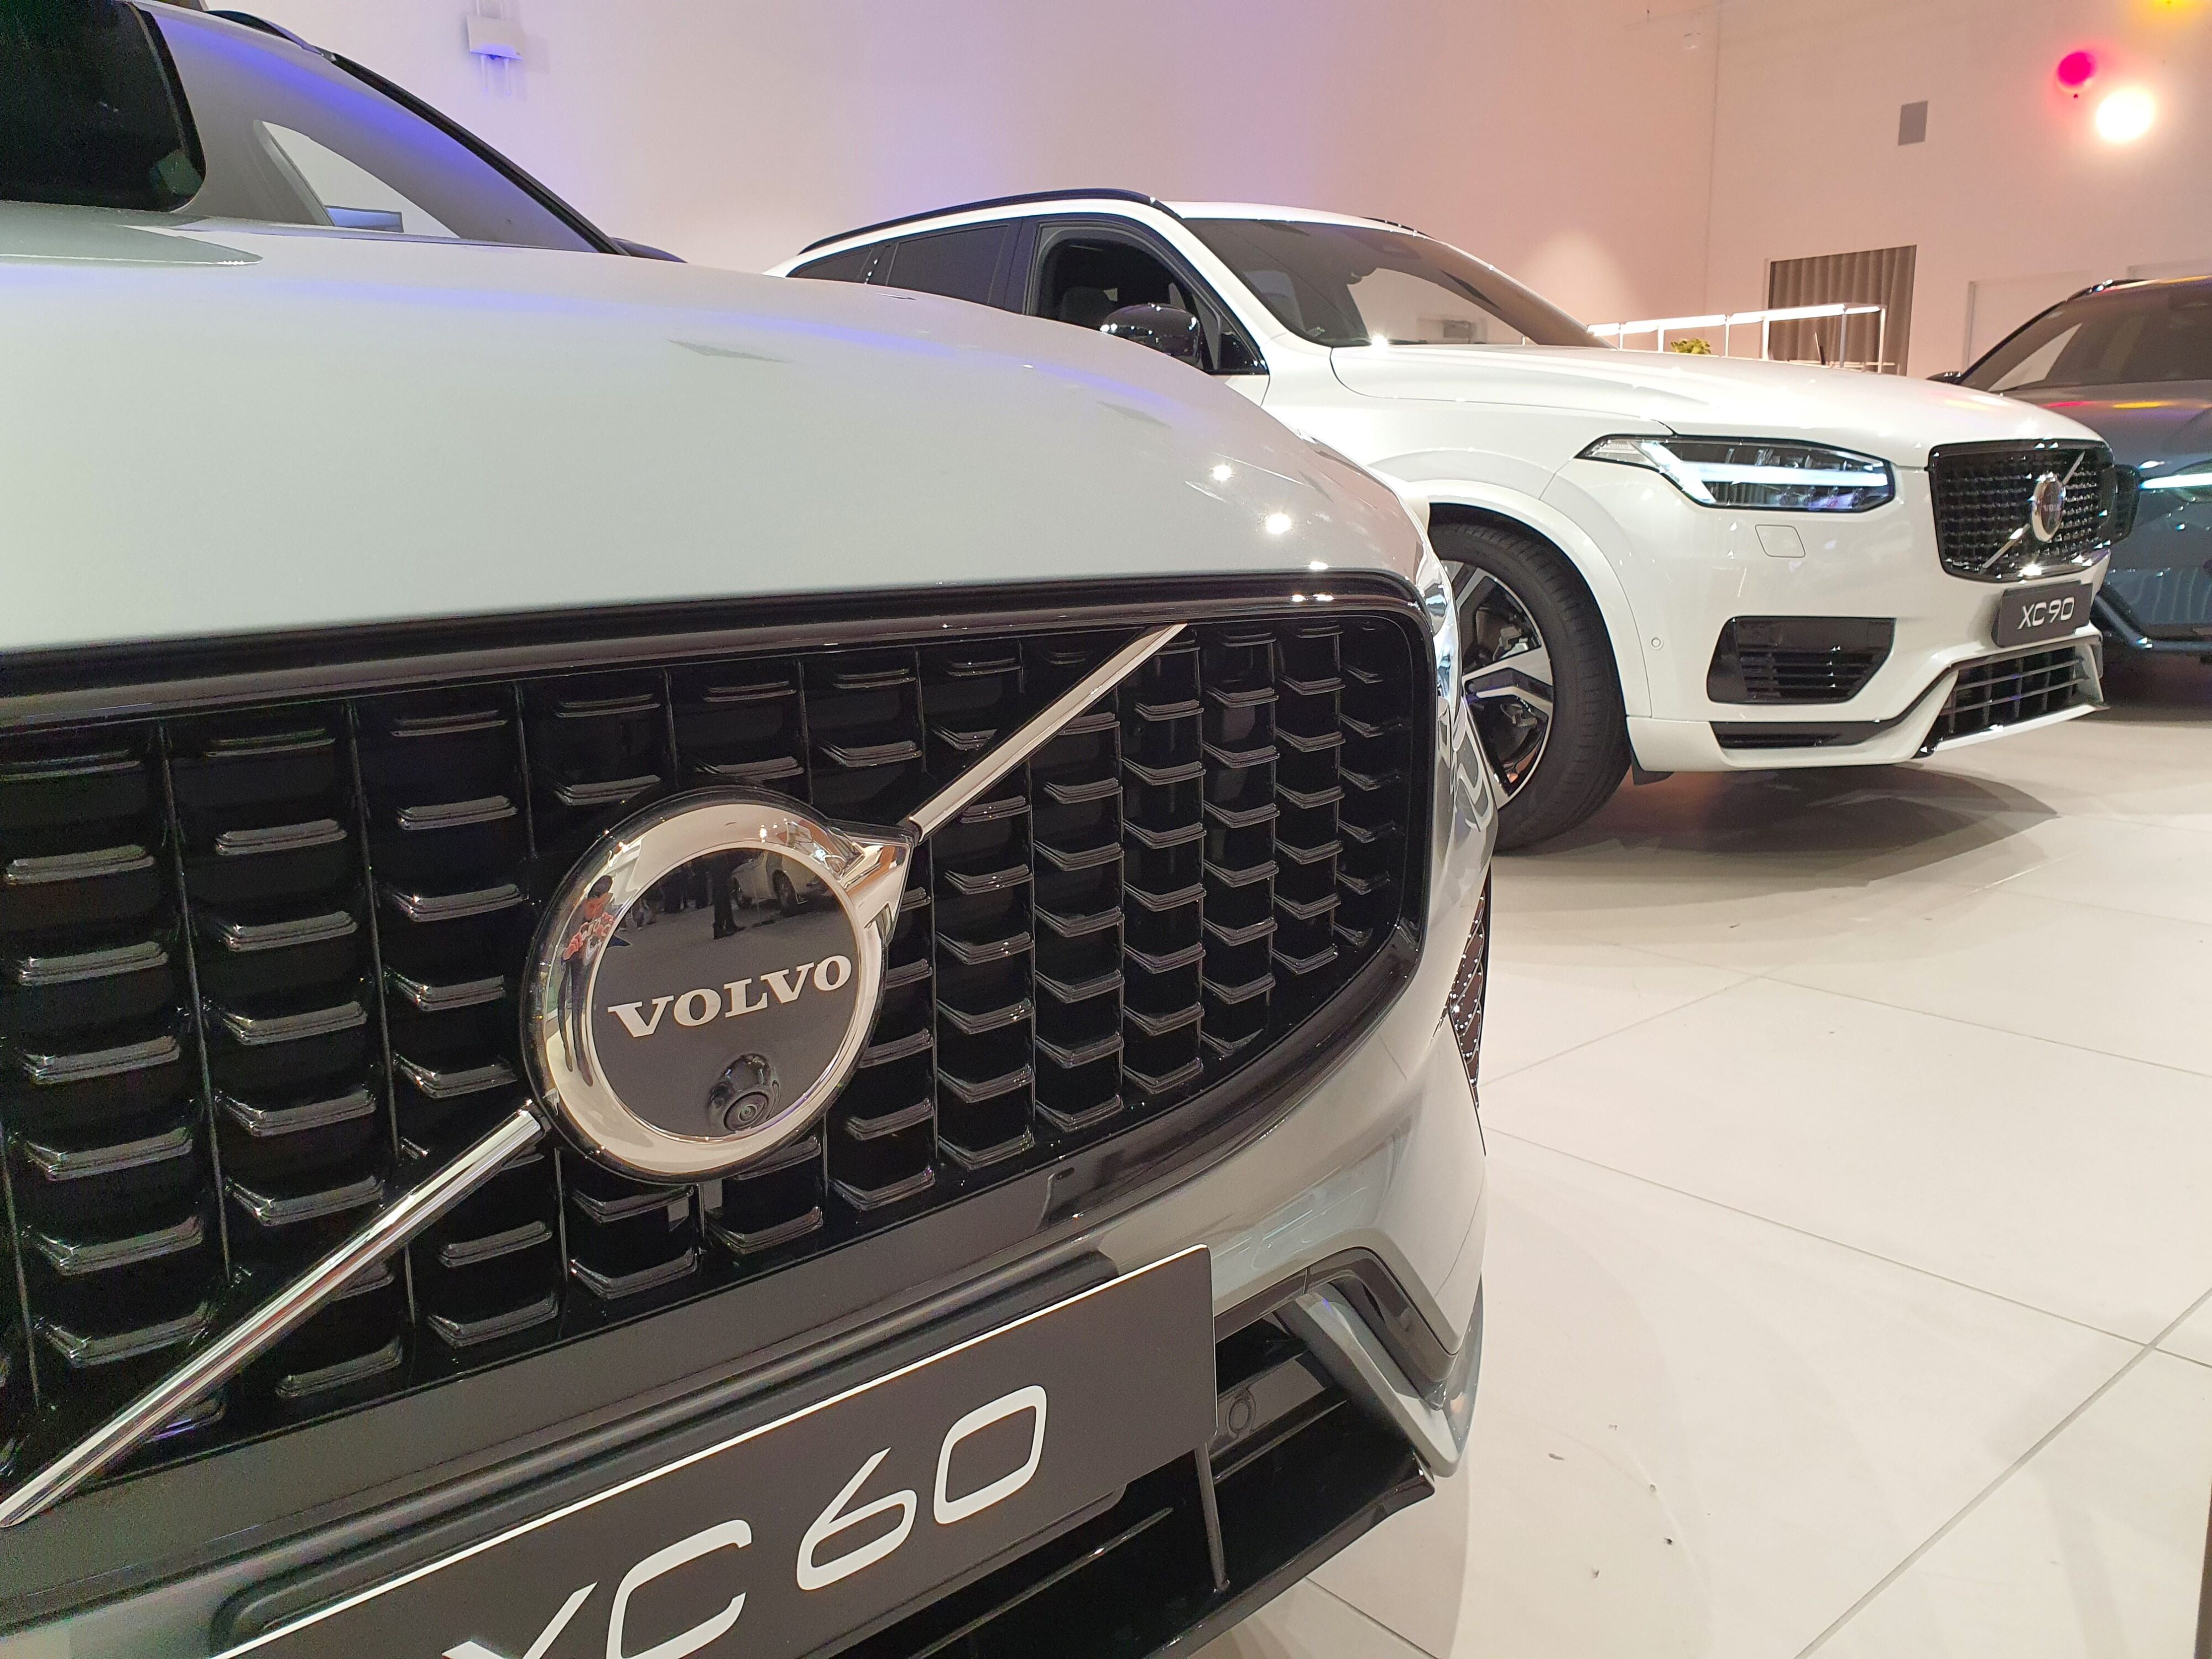 Close up shot of the Volvo badge on the front of an XC60 with a Volvo XC90 in the background